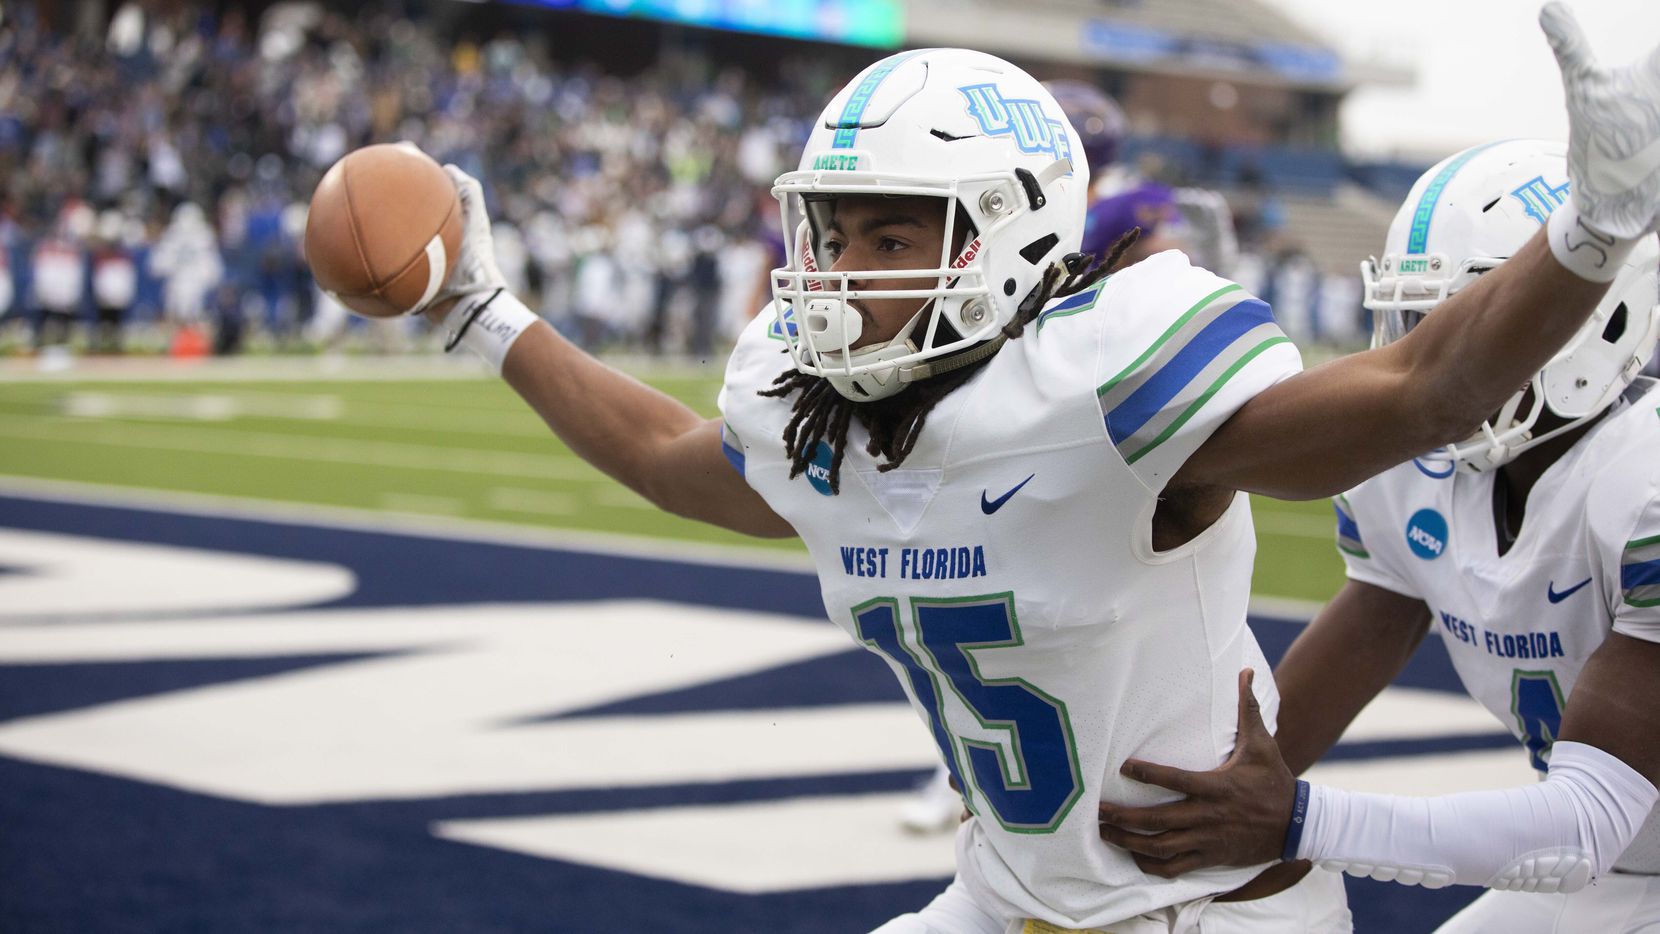 West Florida wide receiver Kevin Grant celebrates after catching a touchdown pass during the...